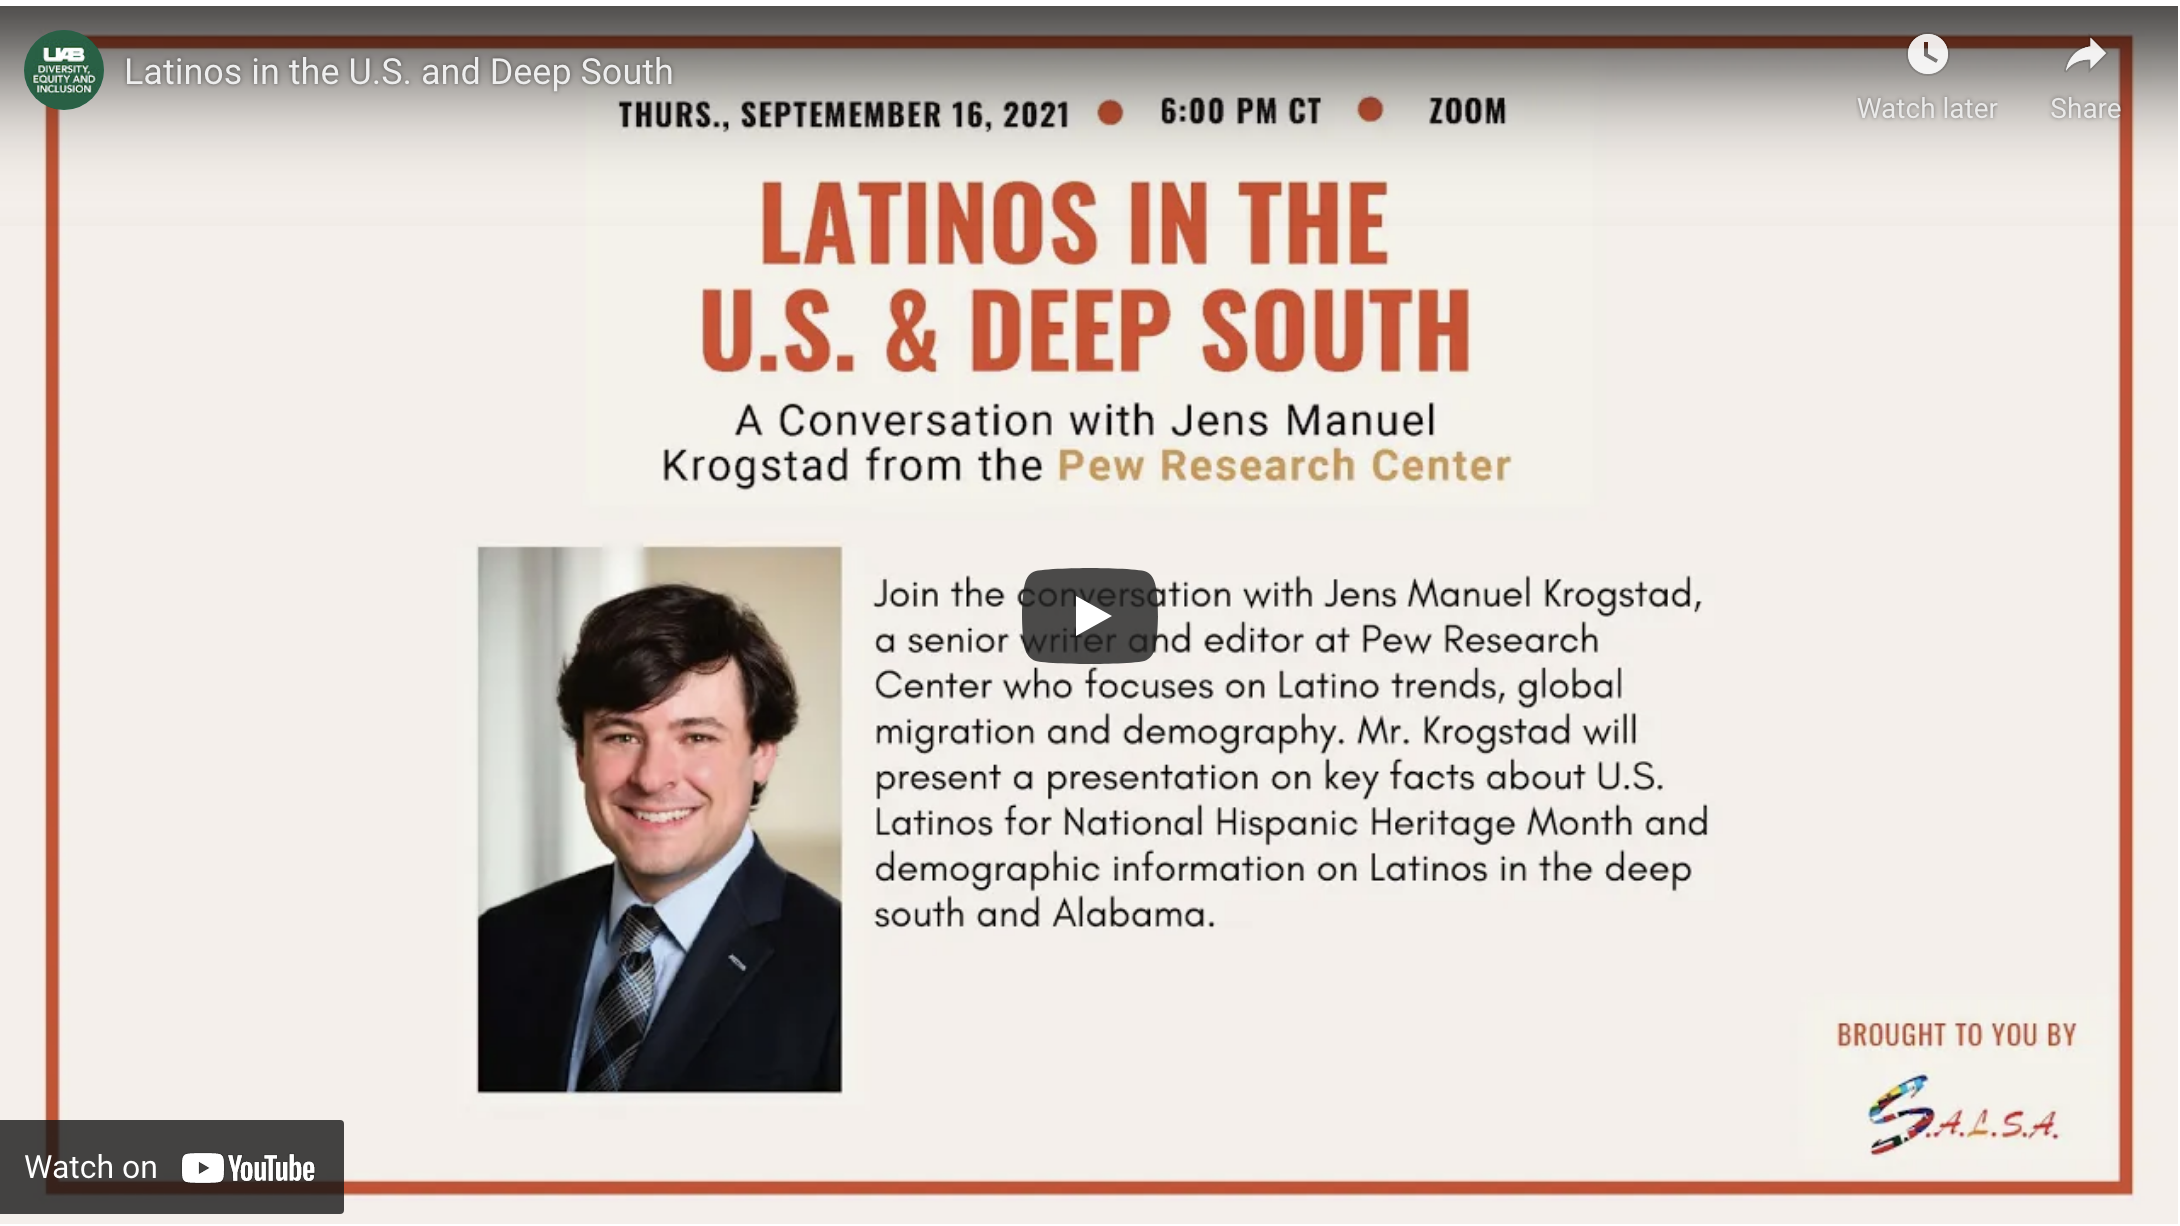 Latinos in the U.S. and Deep South